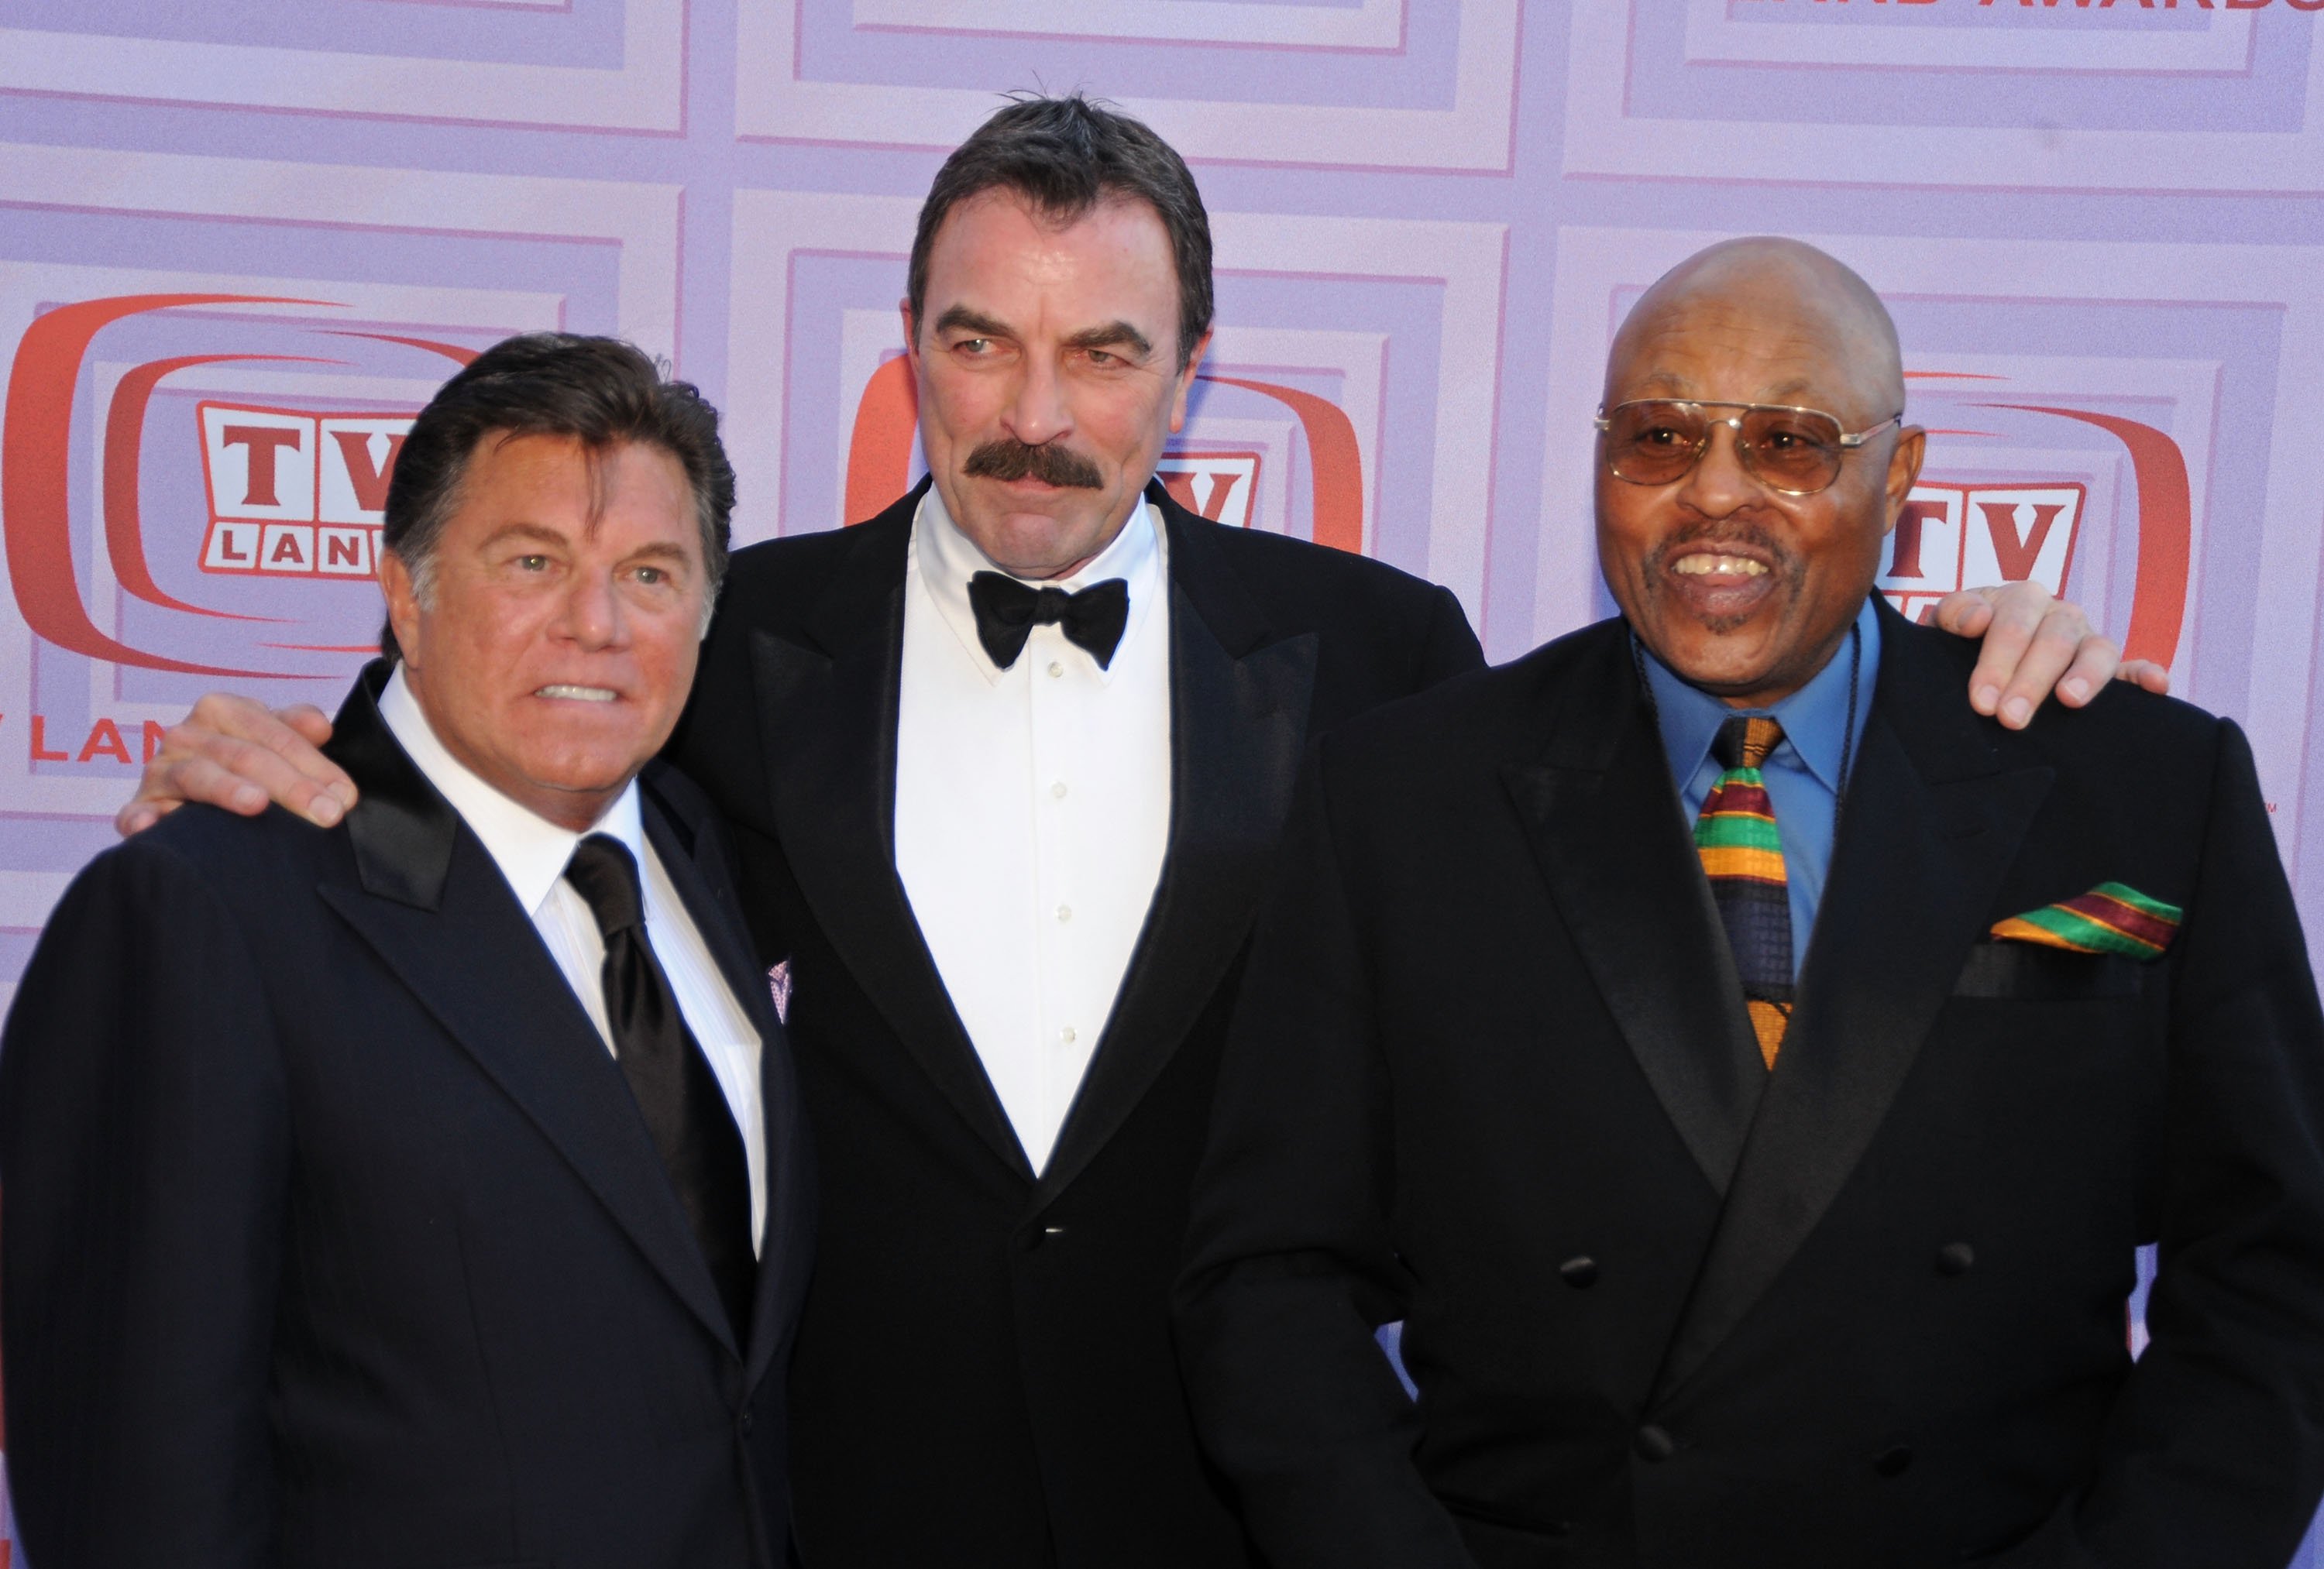 Actors Larry Manetti, Tom Selleck and Roger E. Mosley of " Magnum P.I." attend the 7th Annual TV Land Awards held at Gibson Amphitheatre on April 19, 2009 in Universal City, California | Source: Getty Images